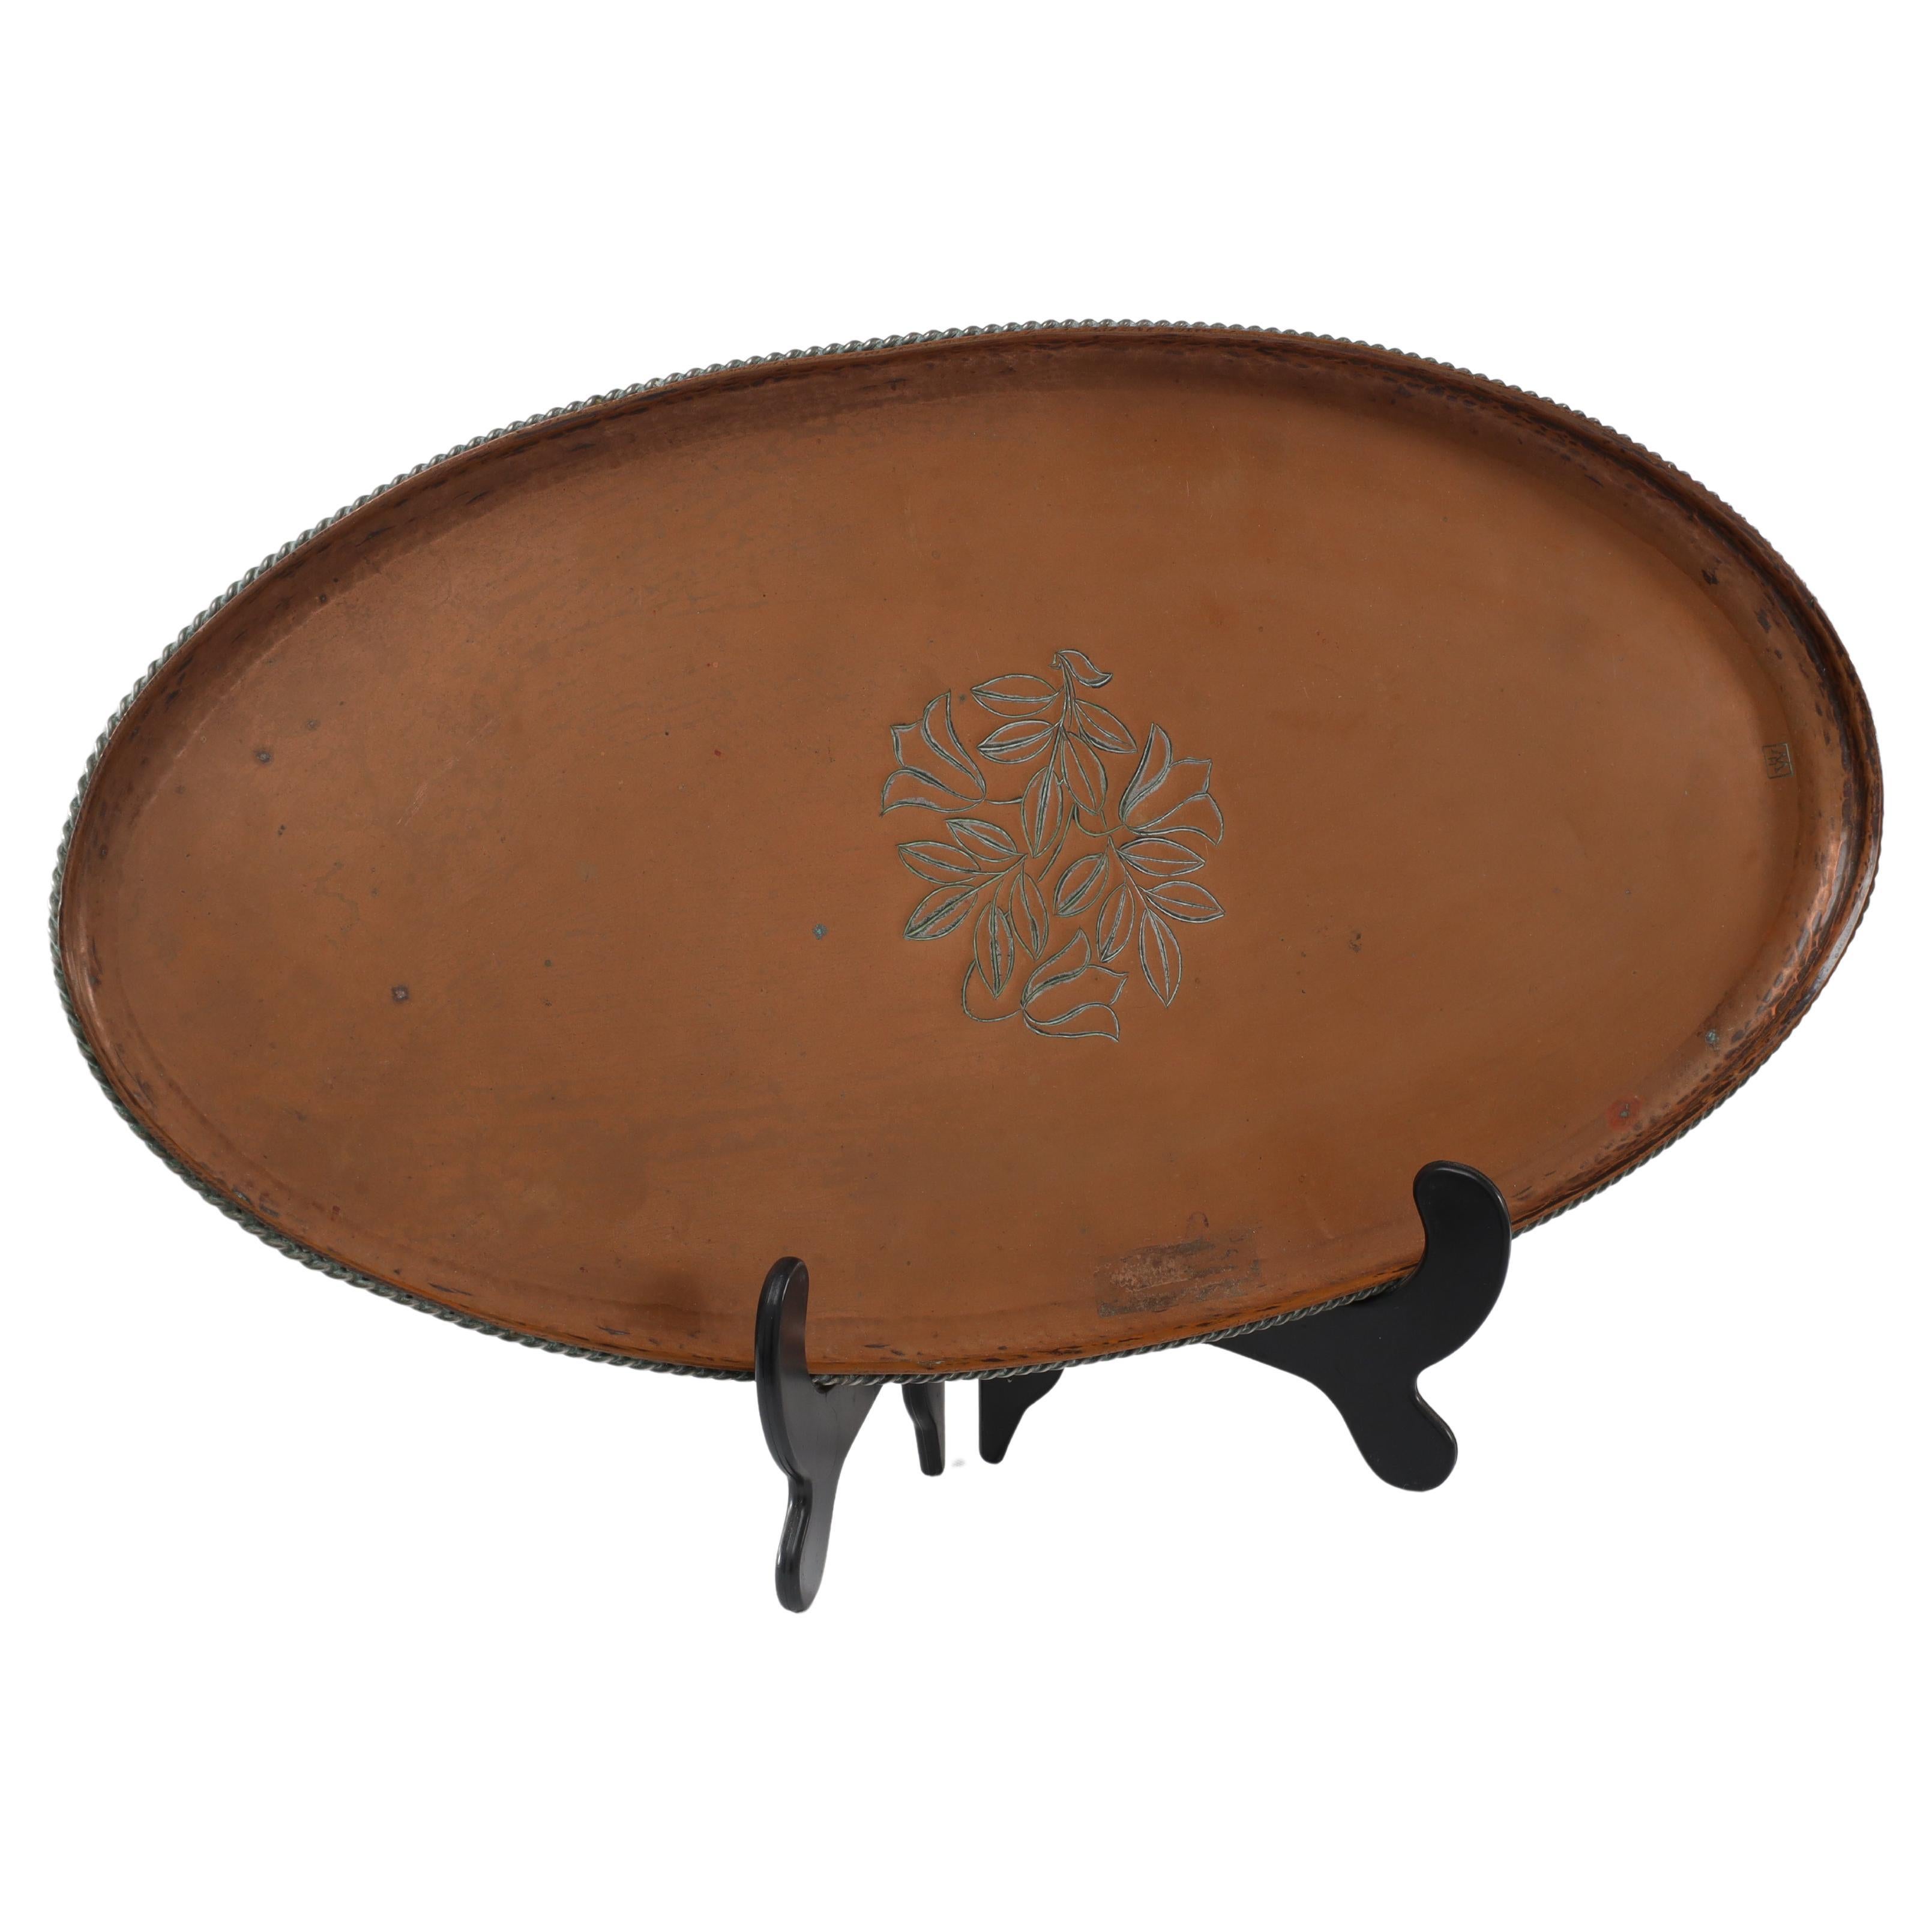 Hugh Wallis. An Arts & Crafts oval copper tray with rope twist edge